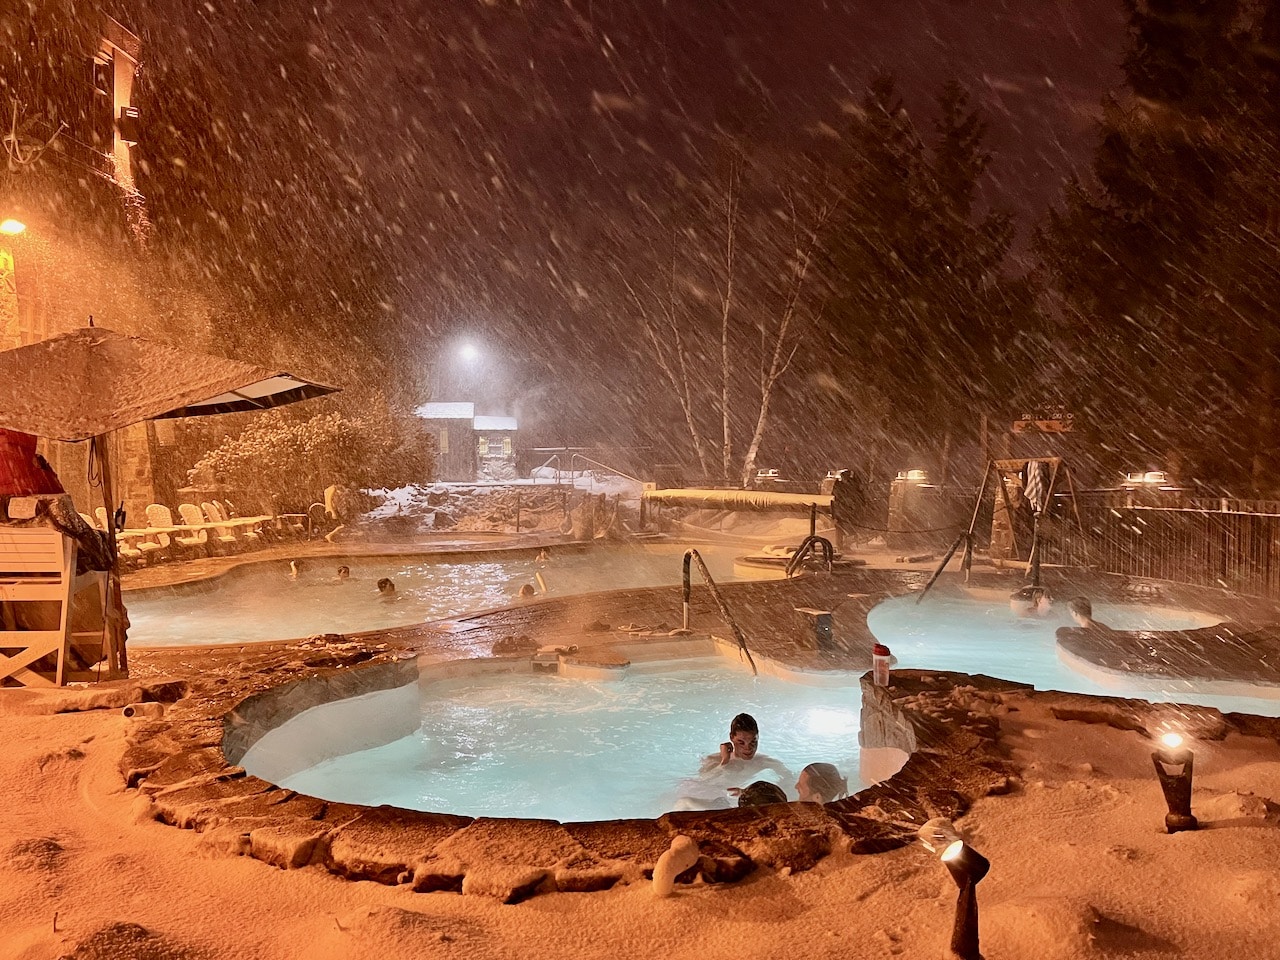 The resort's heated outdoor pool is frequented by guests in any and all weather conditions.